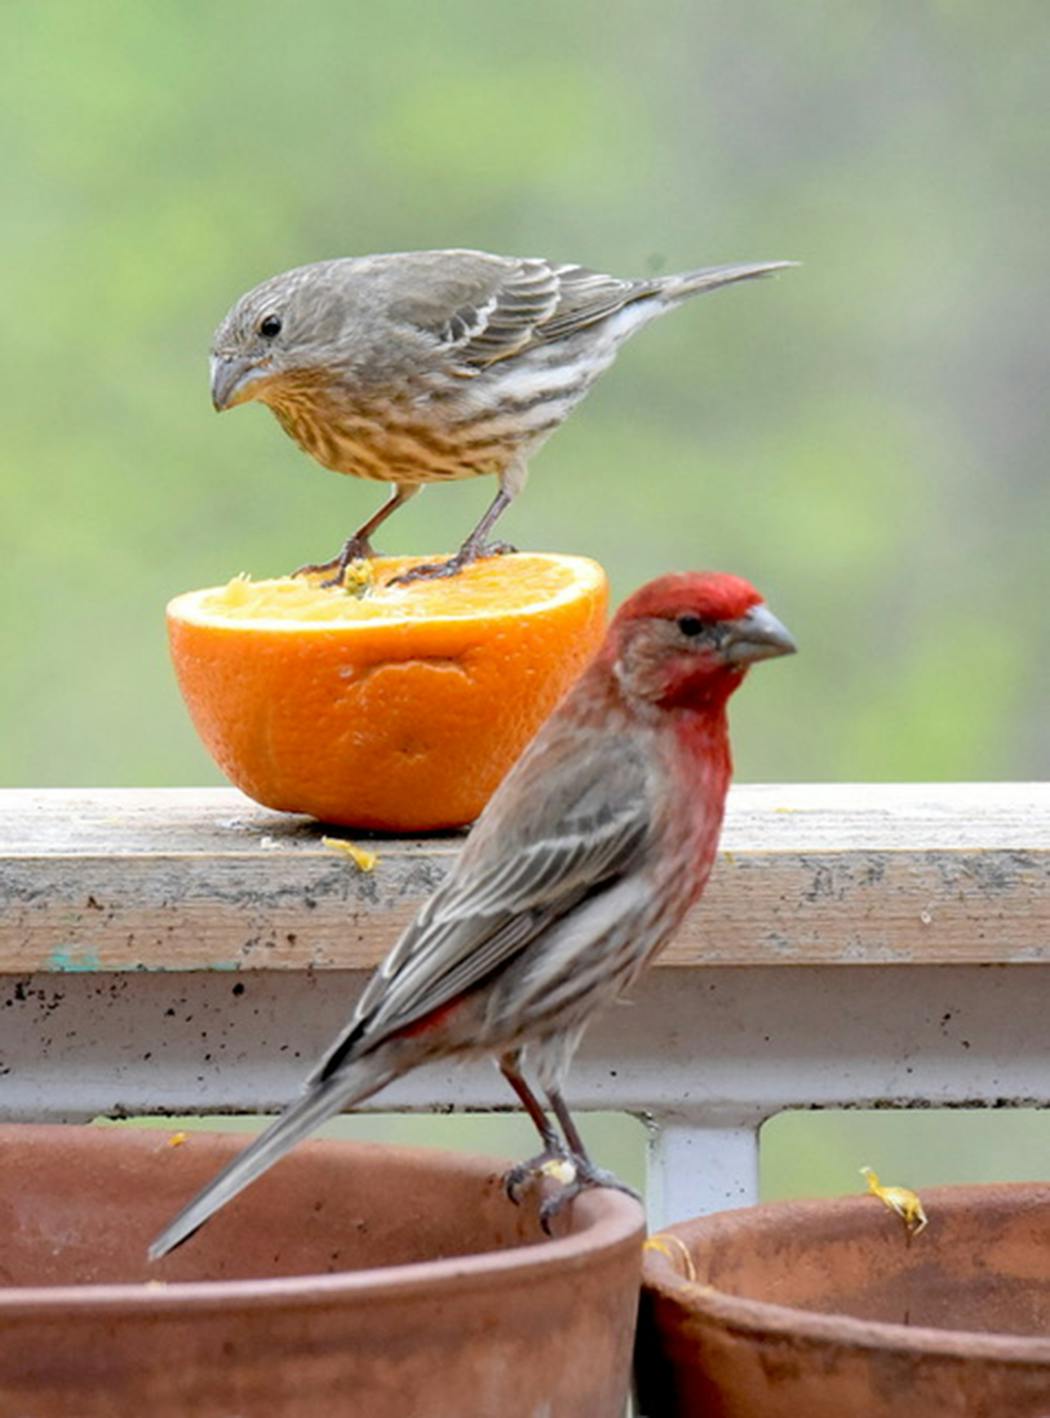 House finches (male is in front) are known as “wreath birds.”